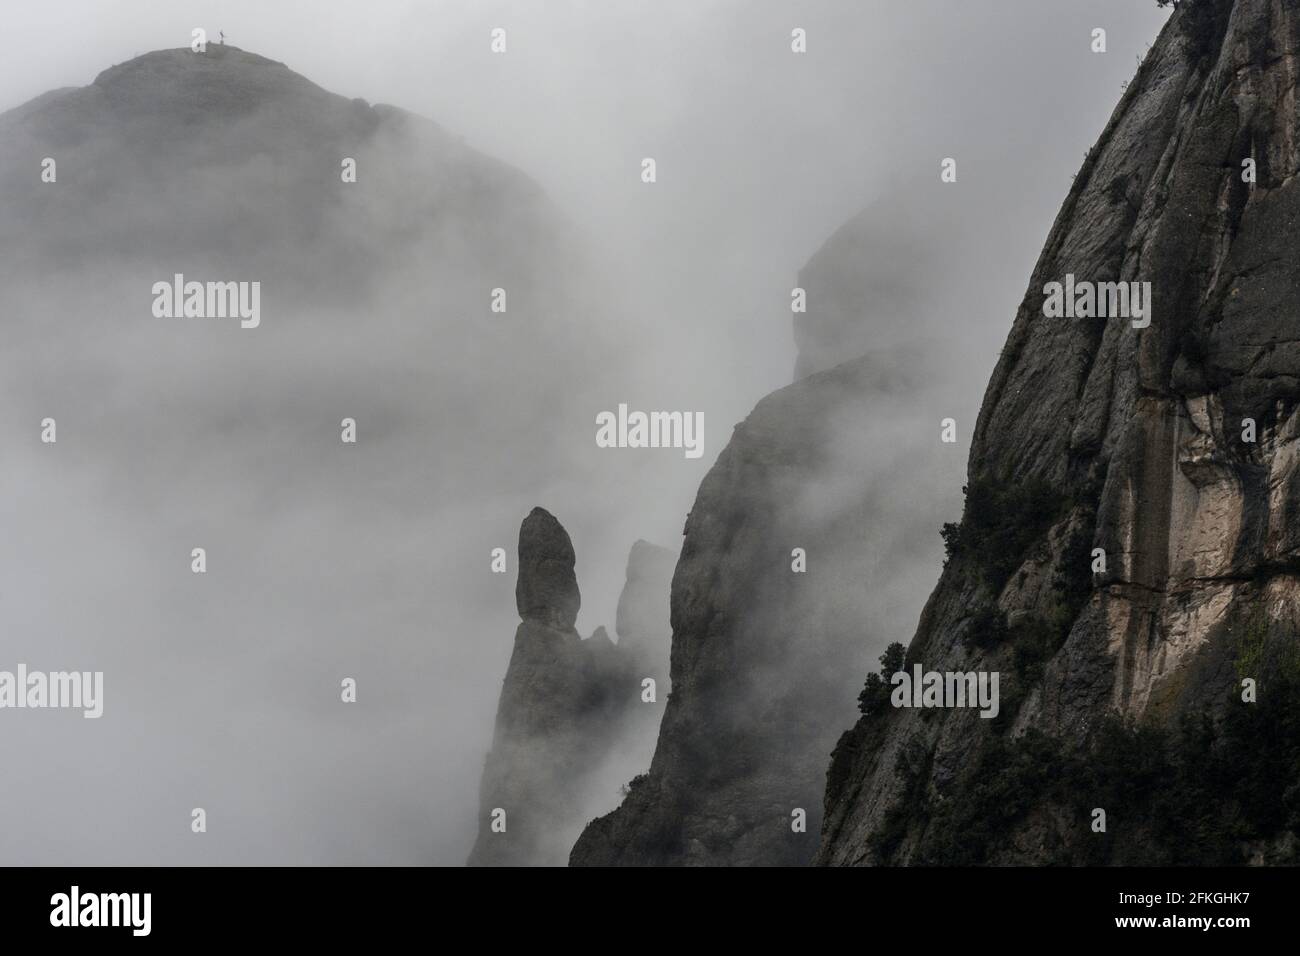 Rising clouds and mist obscure the peaks of Catalonia’s most famous natural landmark in the early morning after some heavy rainfall, resulting in moisture engulfing the peaks of the Montserrat mountain range, west of Barcelona in the province of Catalonia, Spain. © Olli Geibel Stock Photo